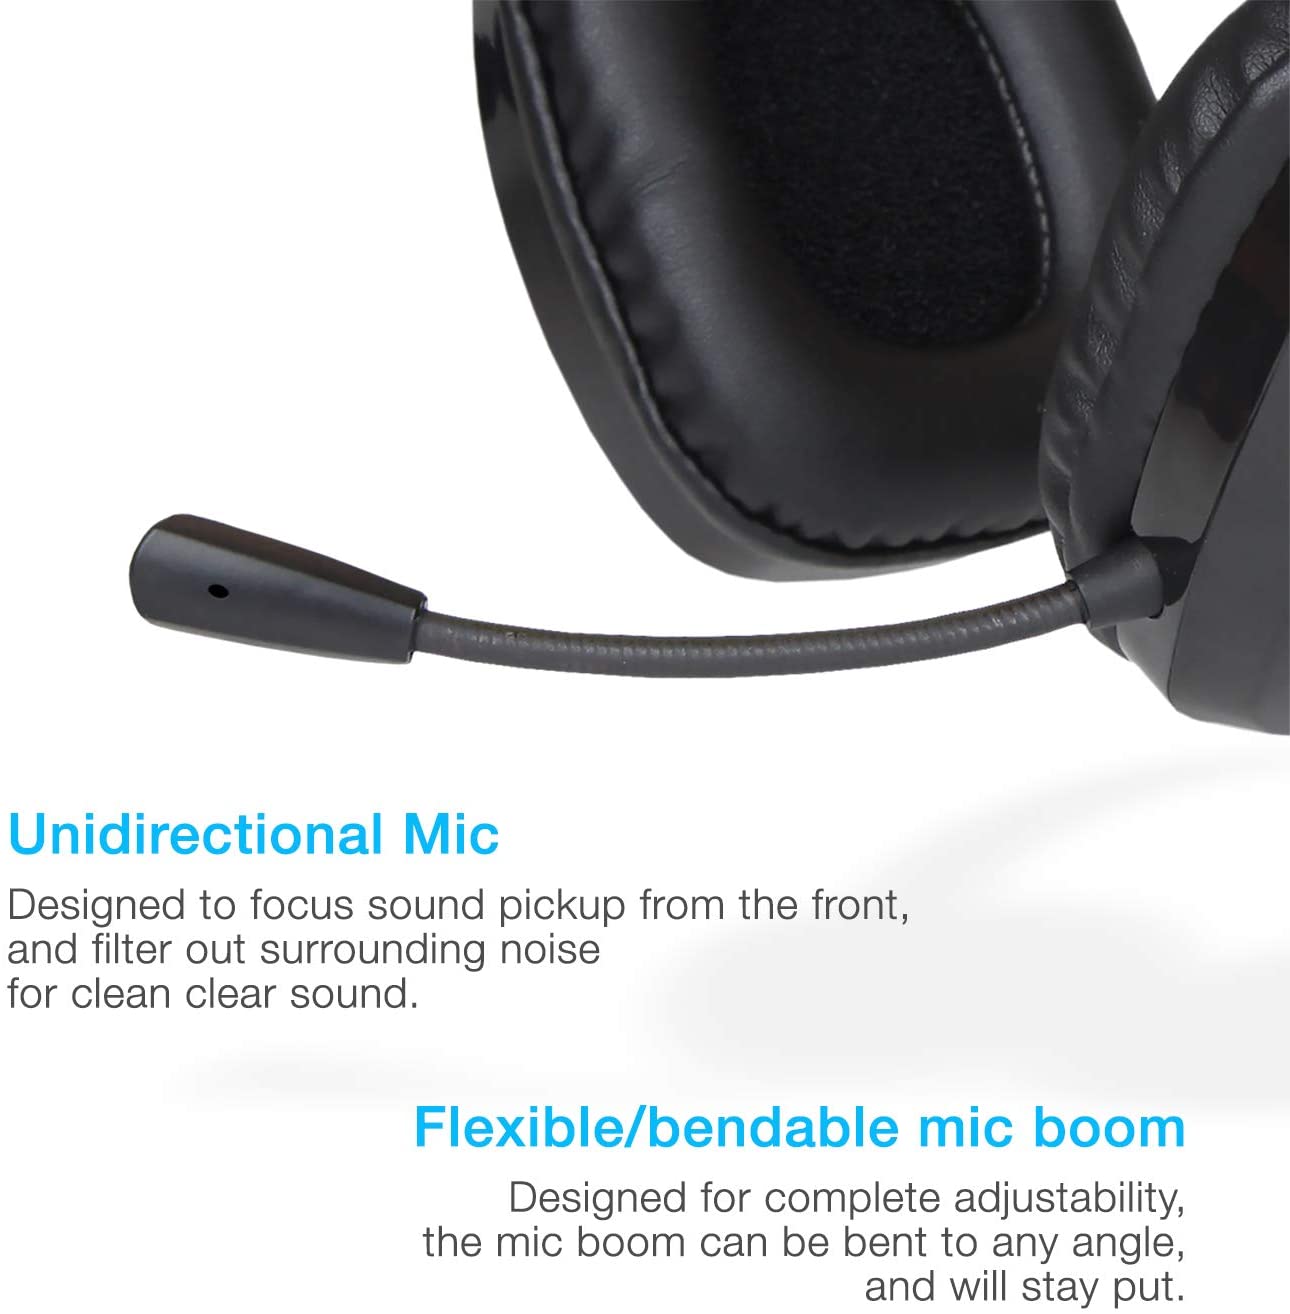 Classroom or Home Cyber Acoustics USB Stereo Headset with Headphones and Noise Cancelling Microphone for PCs and Other USB Devices in The Office AC-6012 